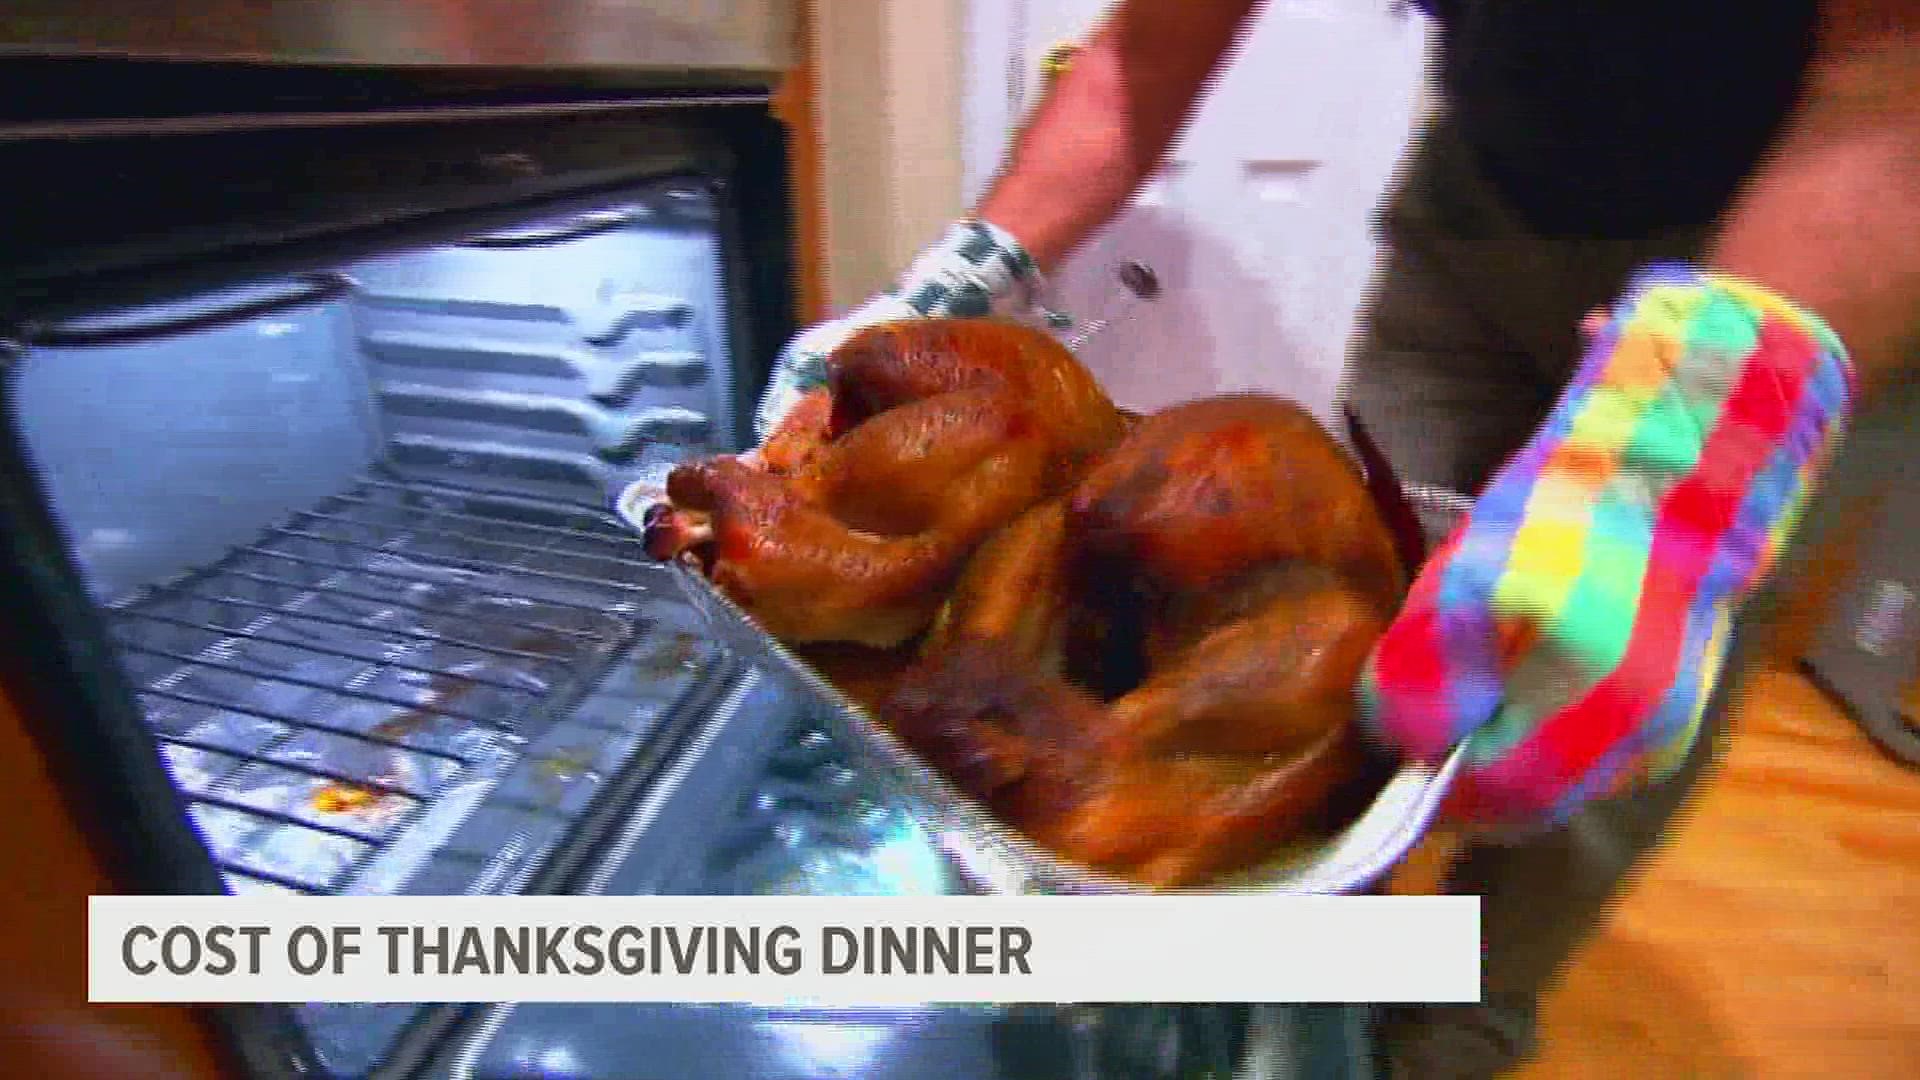 A recent Farm Bureau survey estimates the price for Thanksgiving dinner along with the fixings.